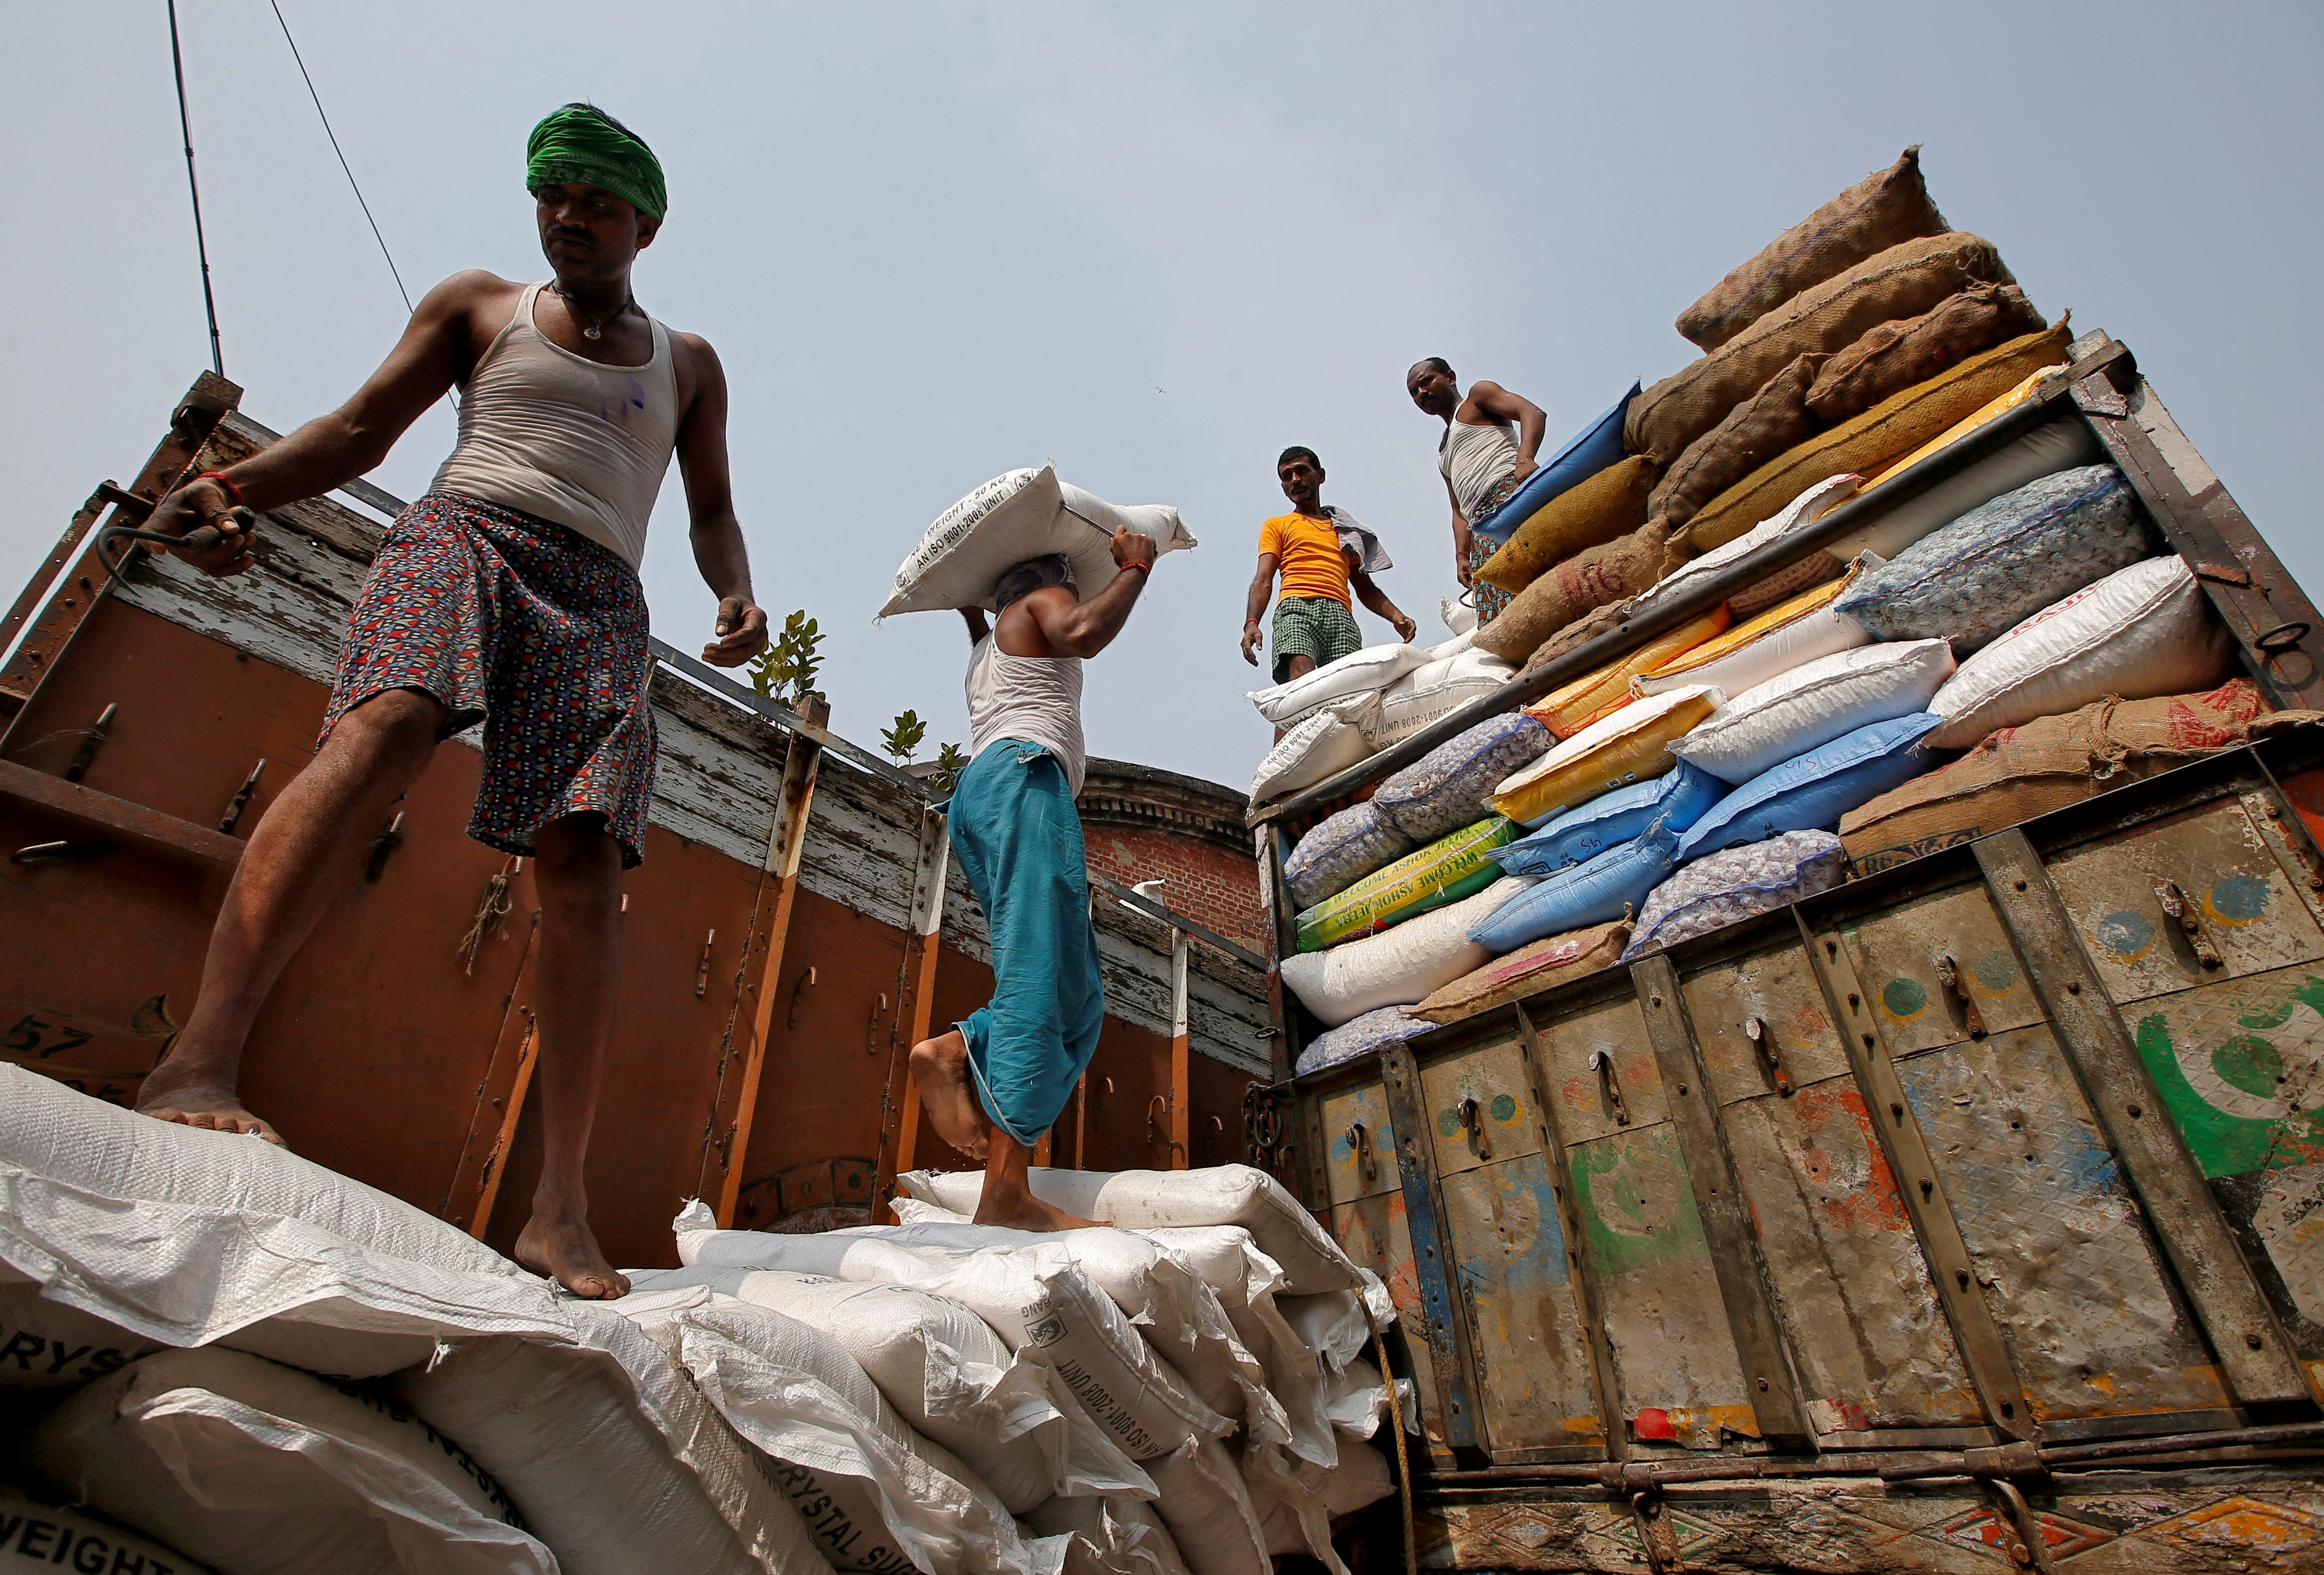 A labourer carries a sack filled with sugar to load it onto a supply truck at a wholesale market in Kolkata, India